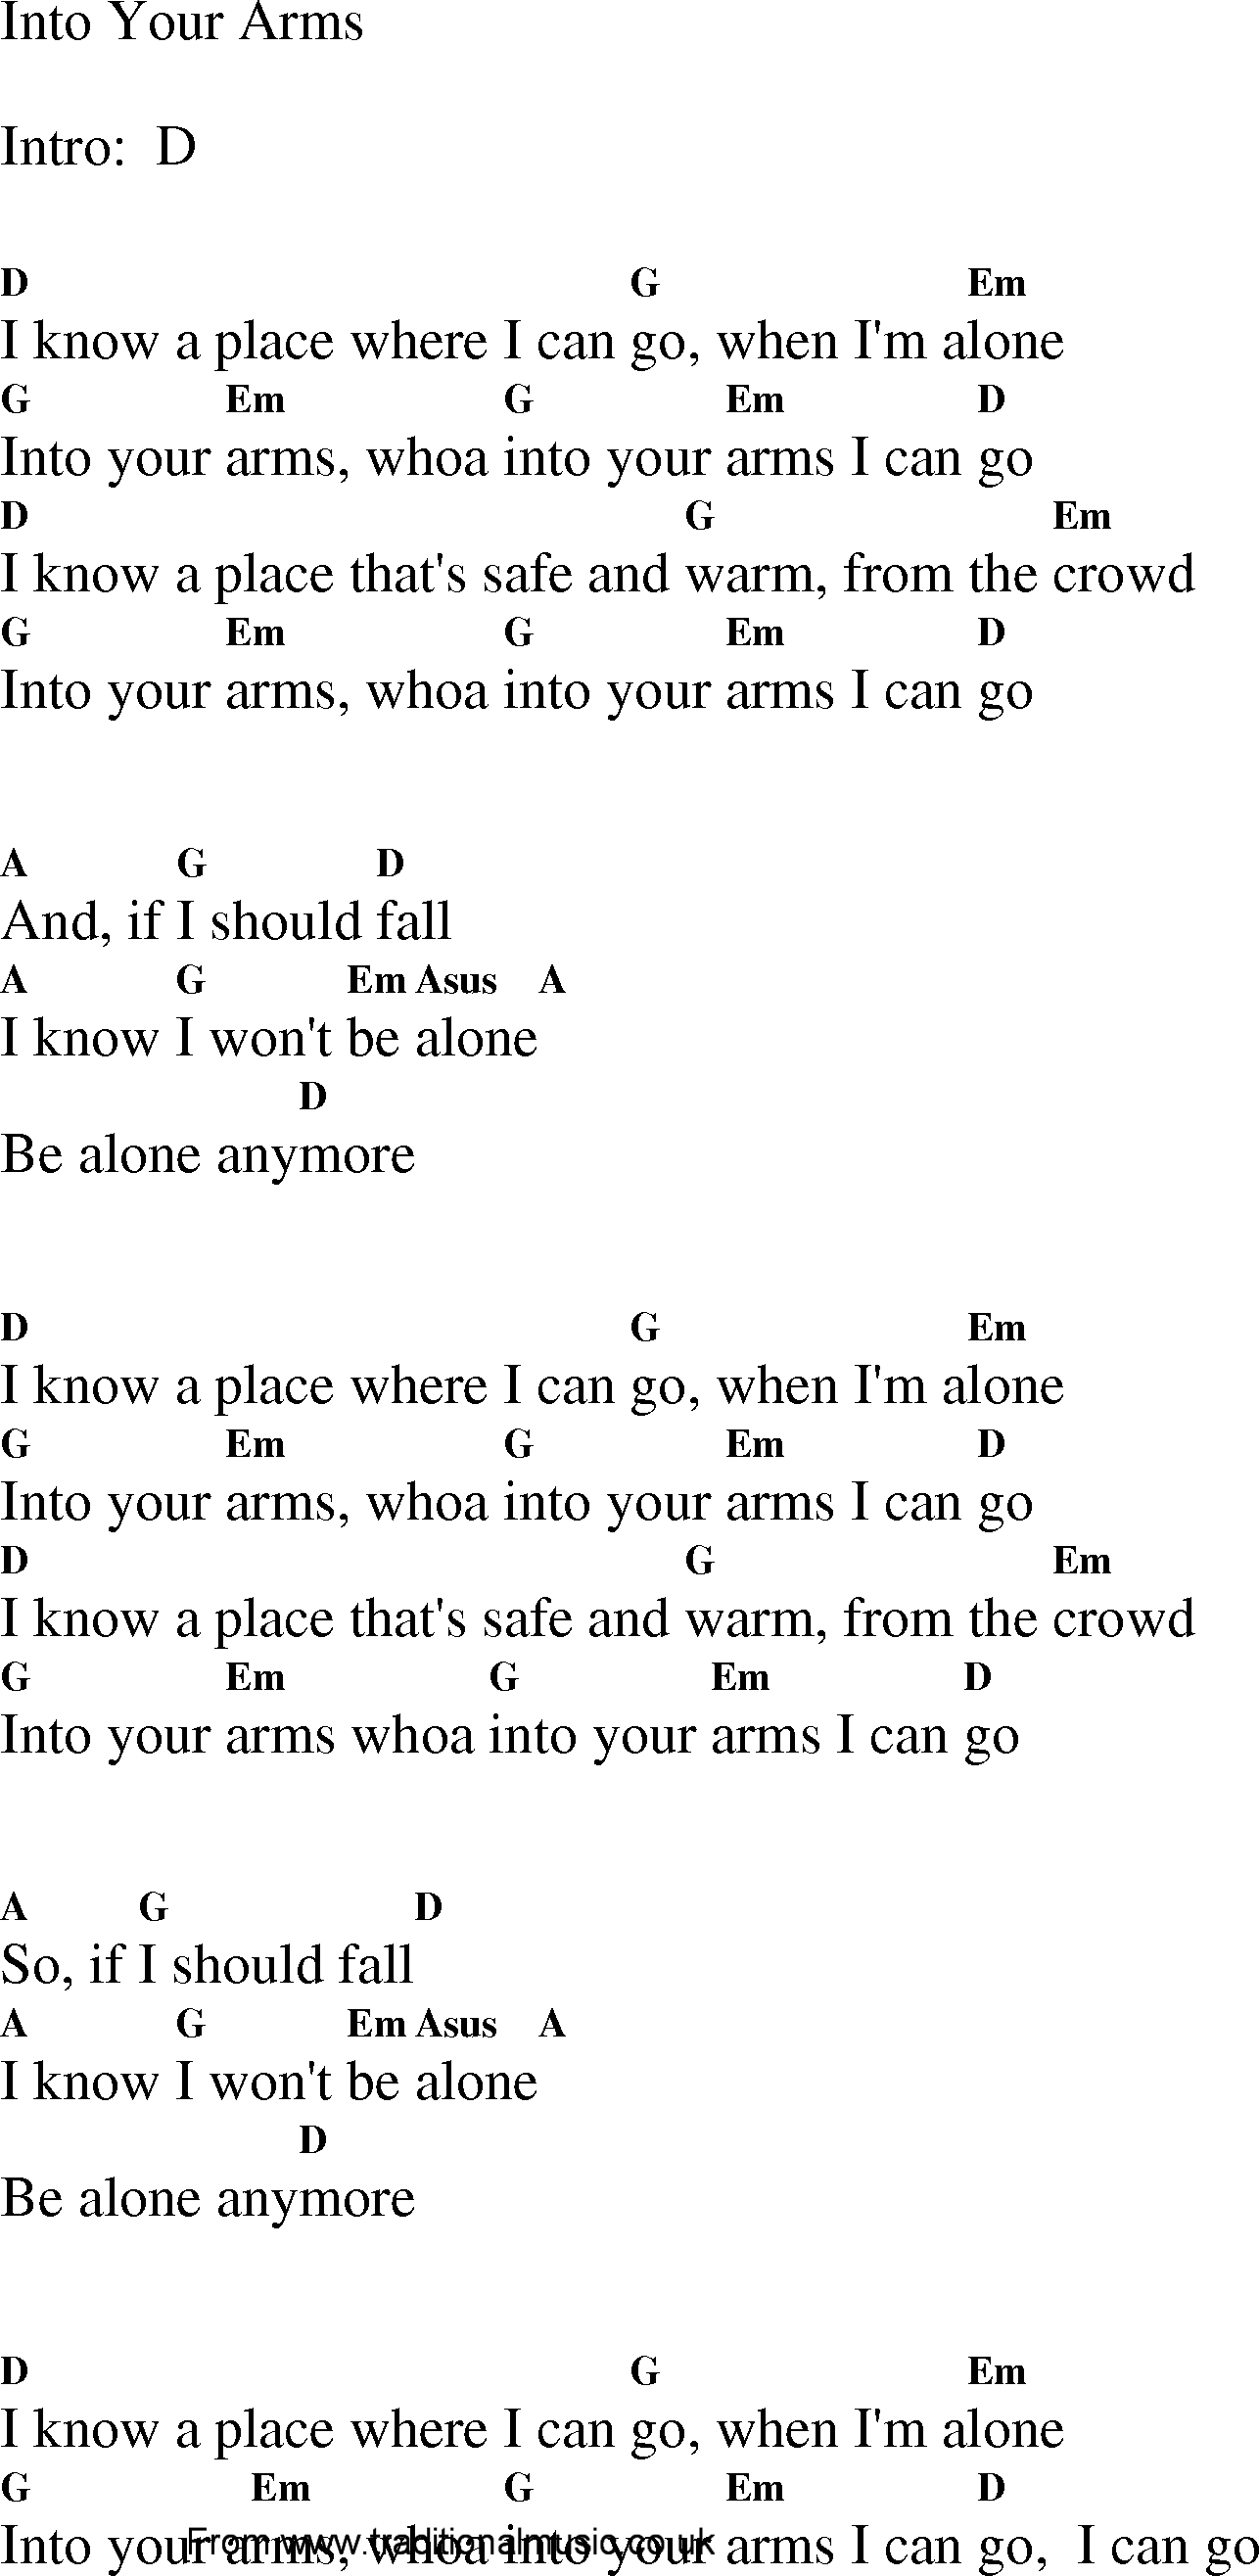 Gospel Song: into_your_arms, lyrics and chords.